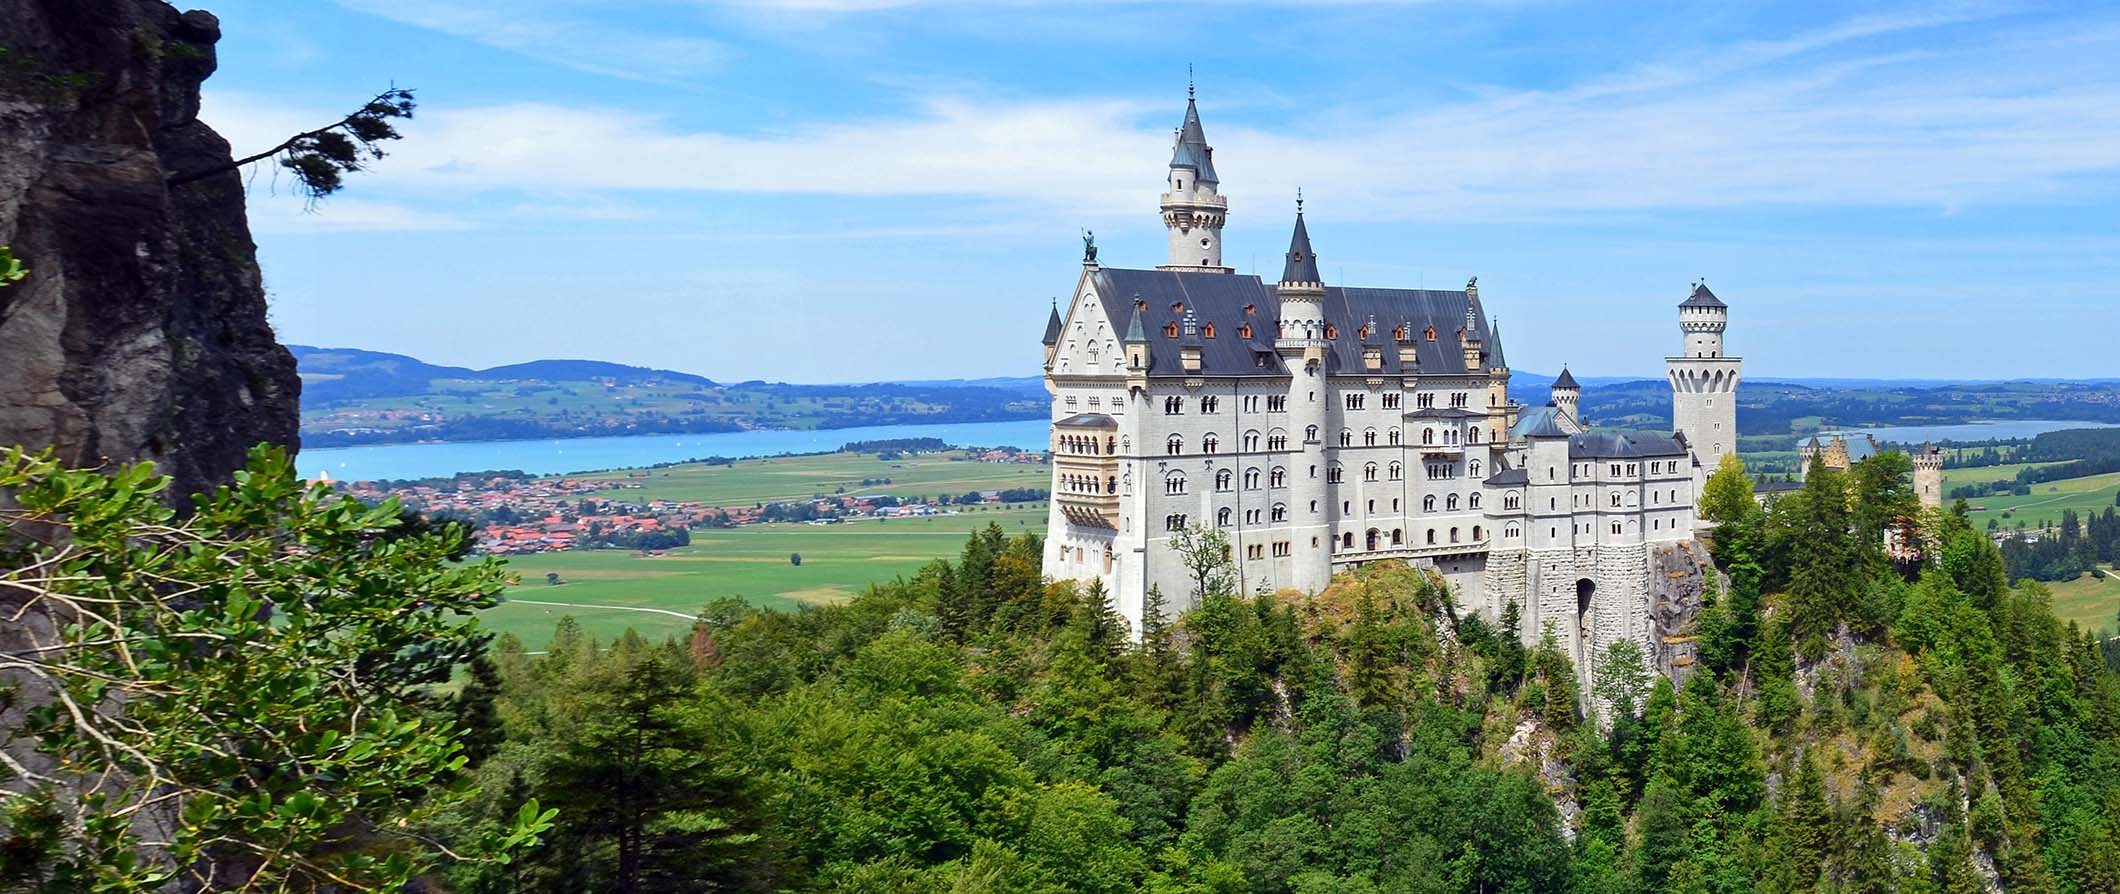 The iconic Neuschwanstein Castle, Germany standing tall over the surrounding greenery in Bavaria